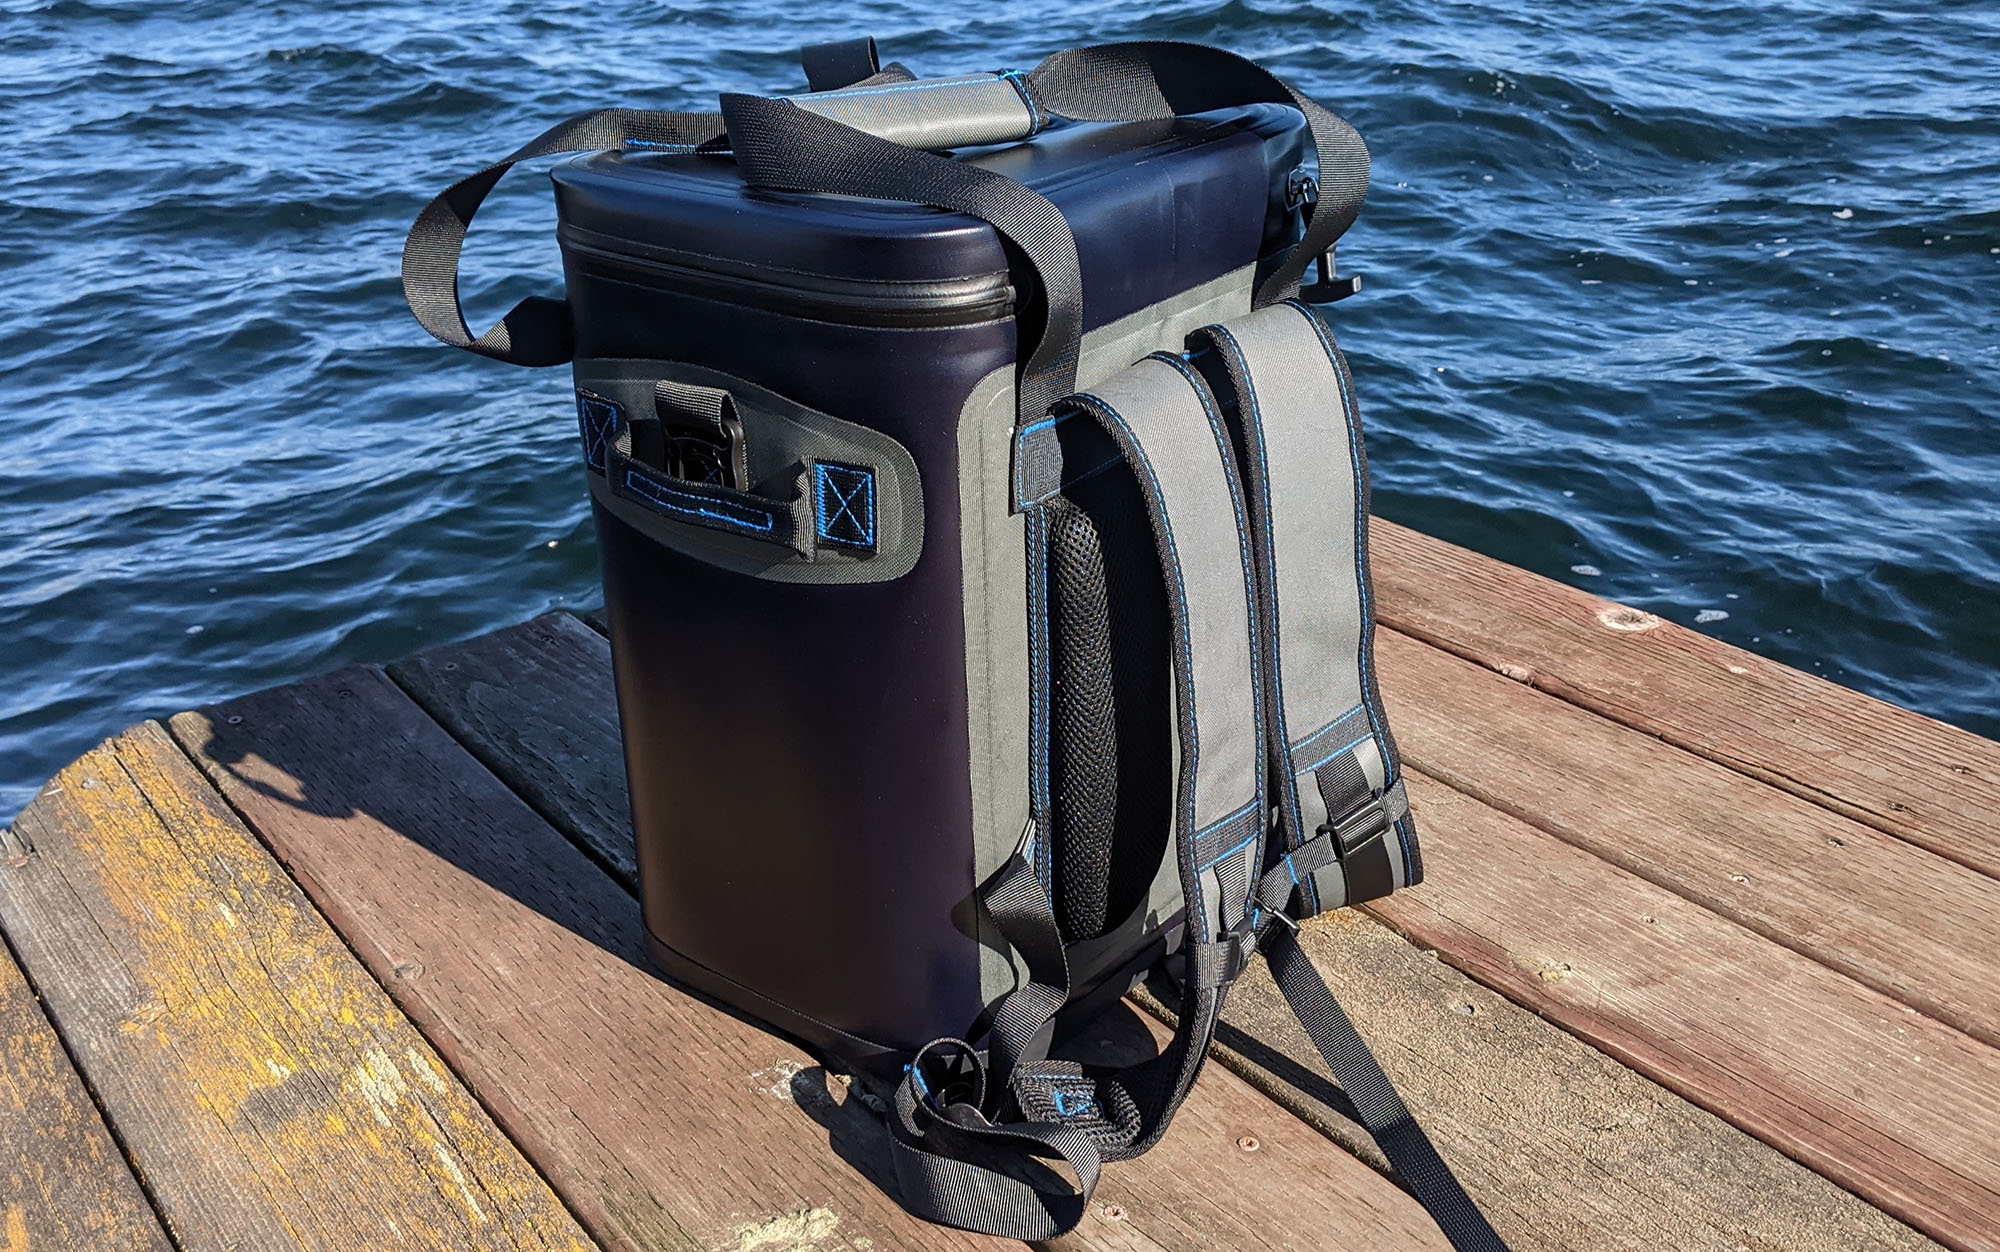 The RTIC Soft Cooler Backpack shares many characteristics with the other soft coolers in the RTIC lineup.